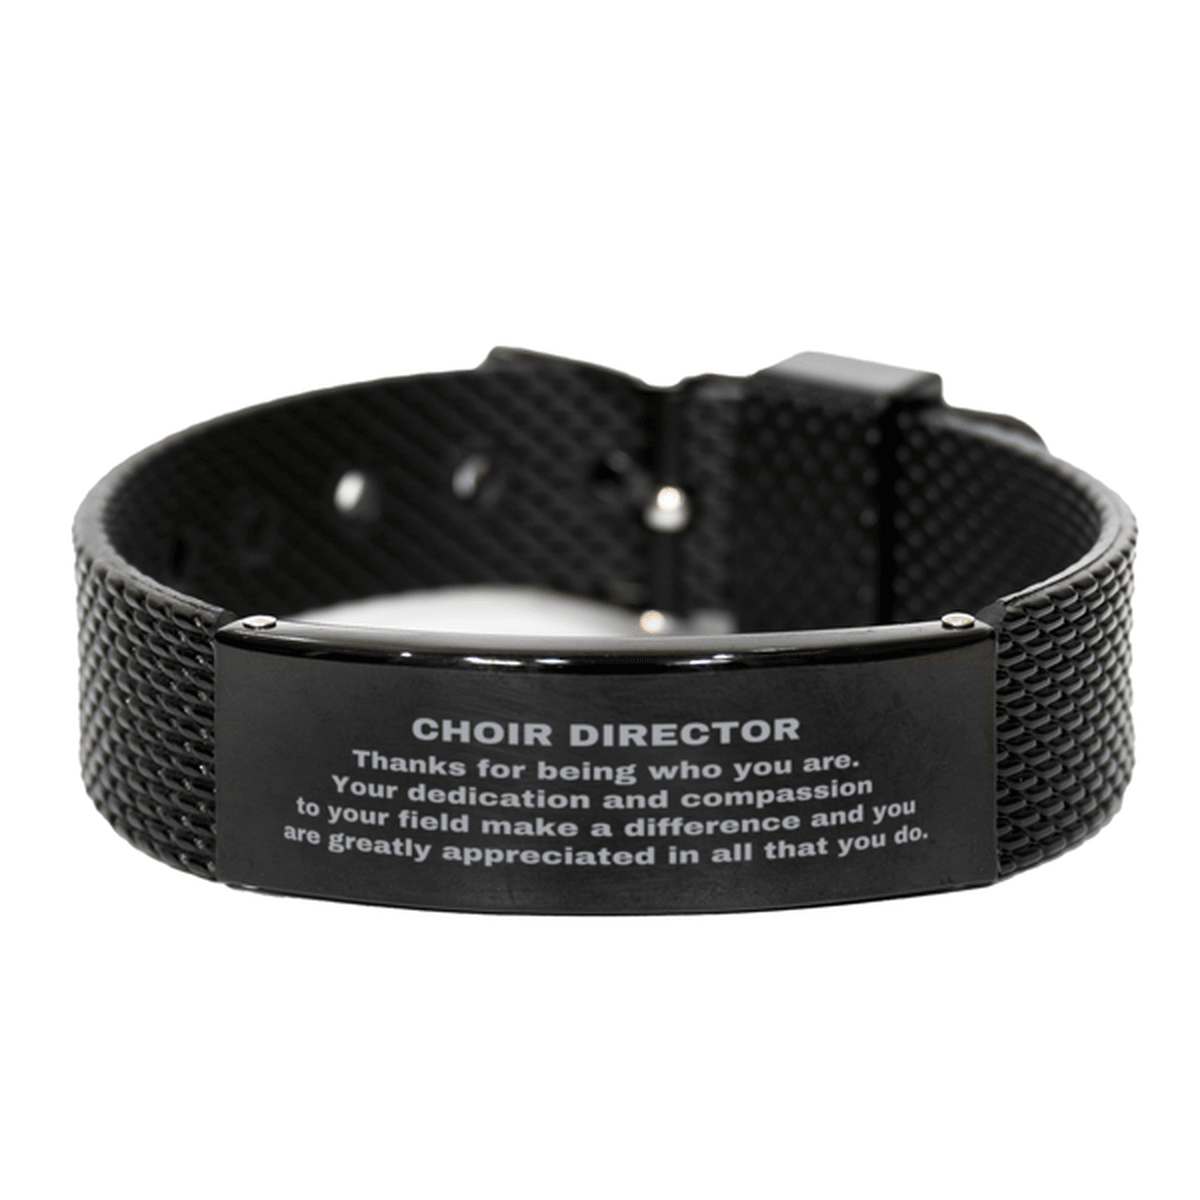 Choir Director Black Shark Mesh Stainless Steel Engraved Bracelet - Thanks for being who you are - Birthday Christmas Jewelry Gifts Coworkers Colleague Boss - Mallard Moon Gift Shop